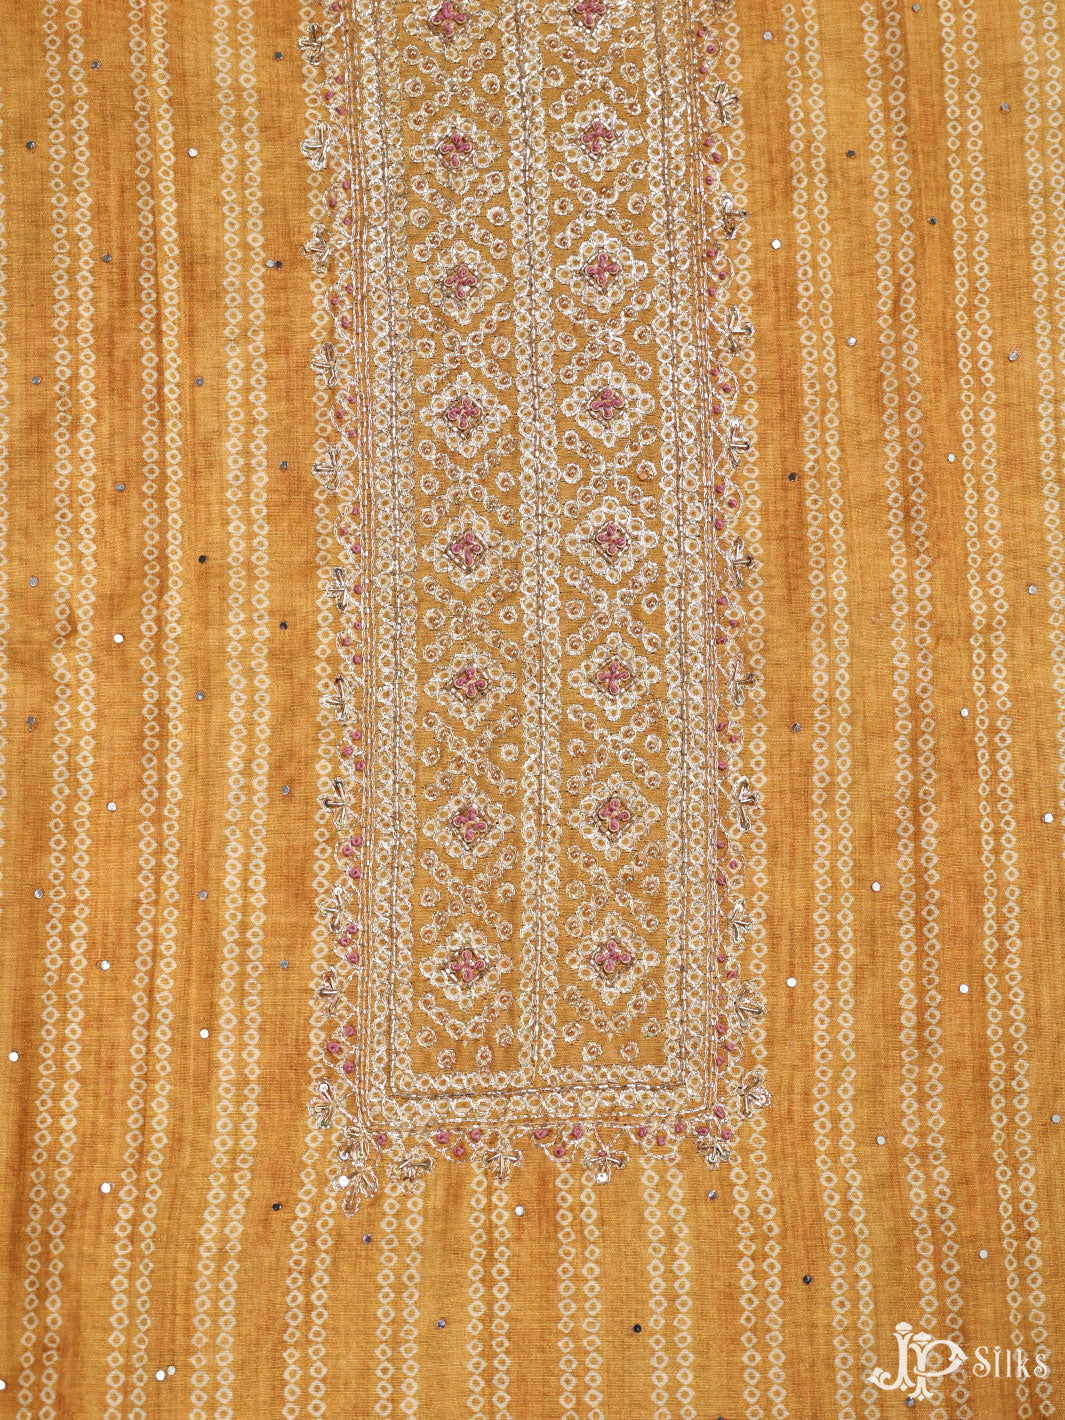 Yellow Tussar Unstiched Chudidhar Material - E1464 - View 3